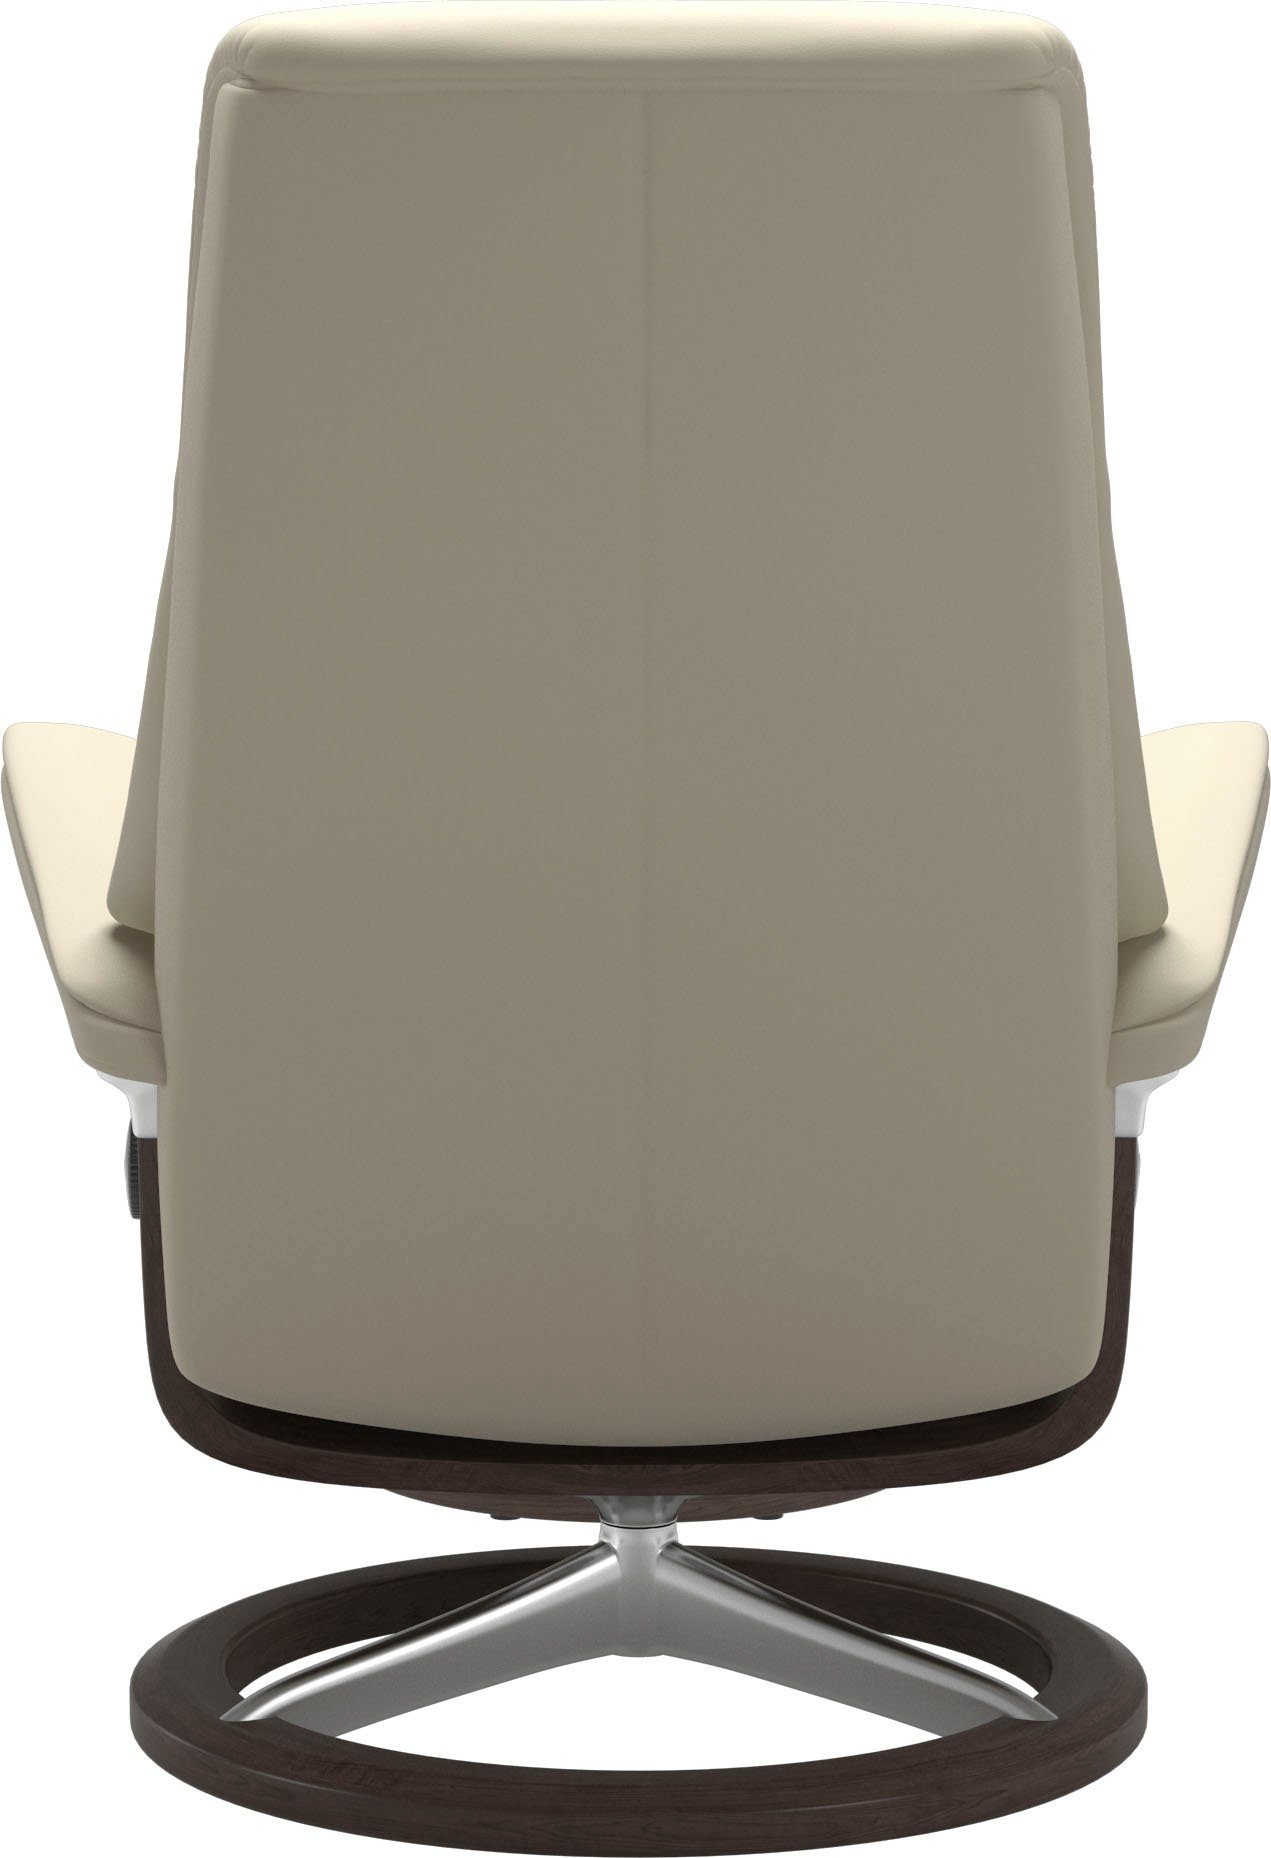 Base, L,Gestell Relaxsessel mit Signature Größe Wenge Stressless® View,